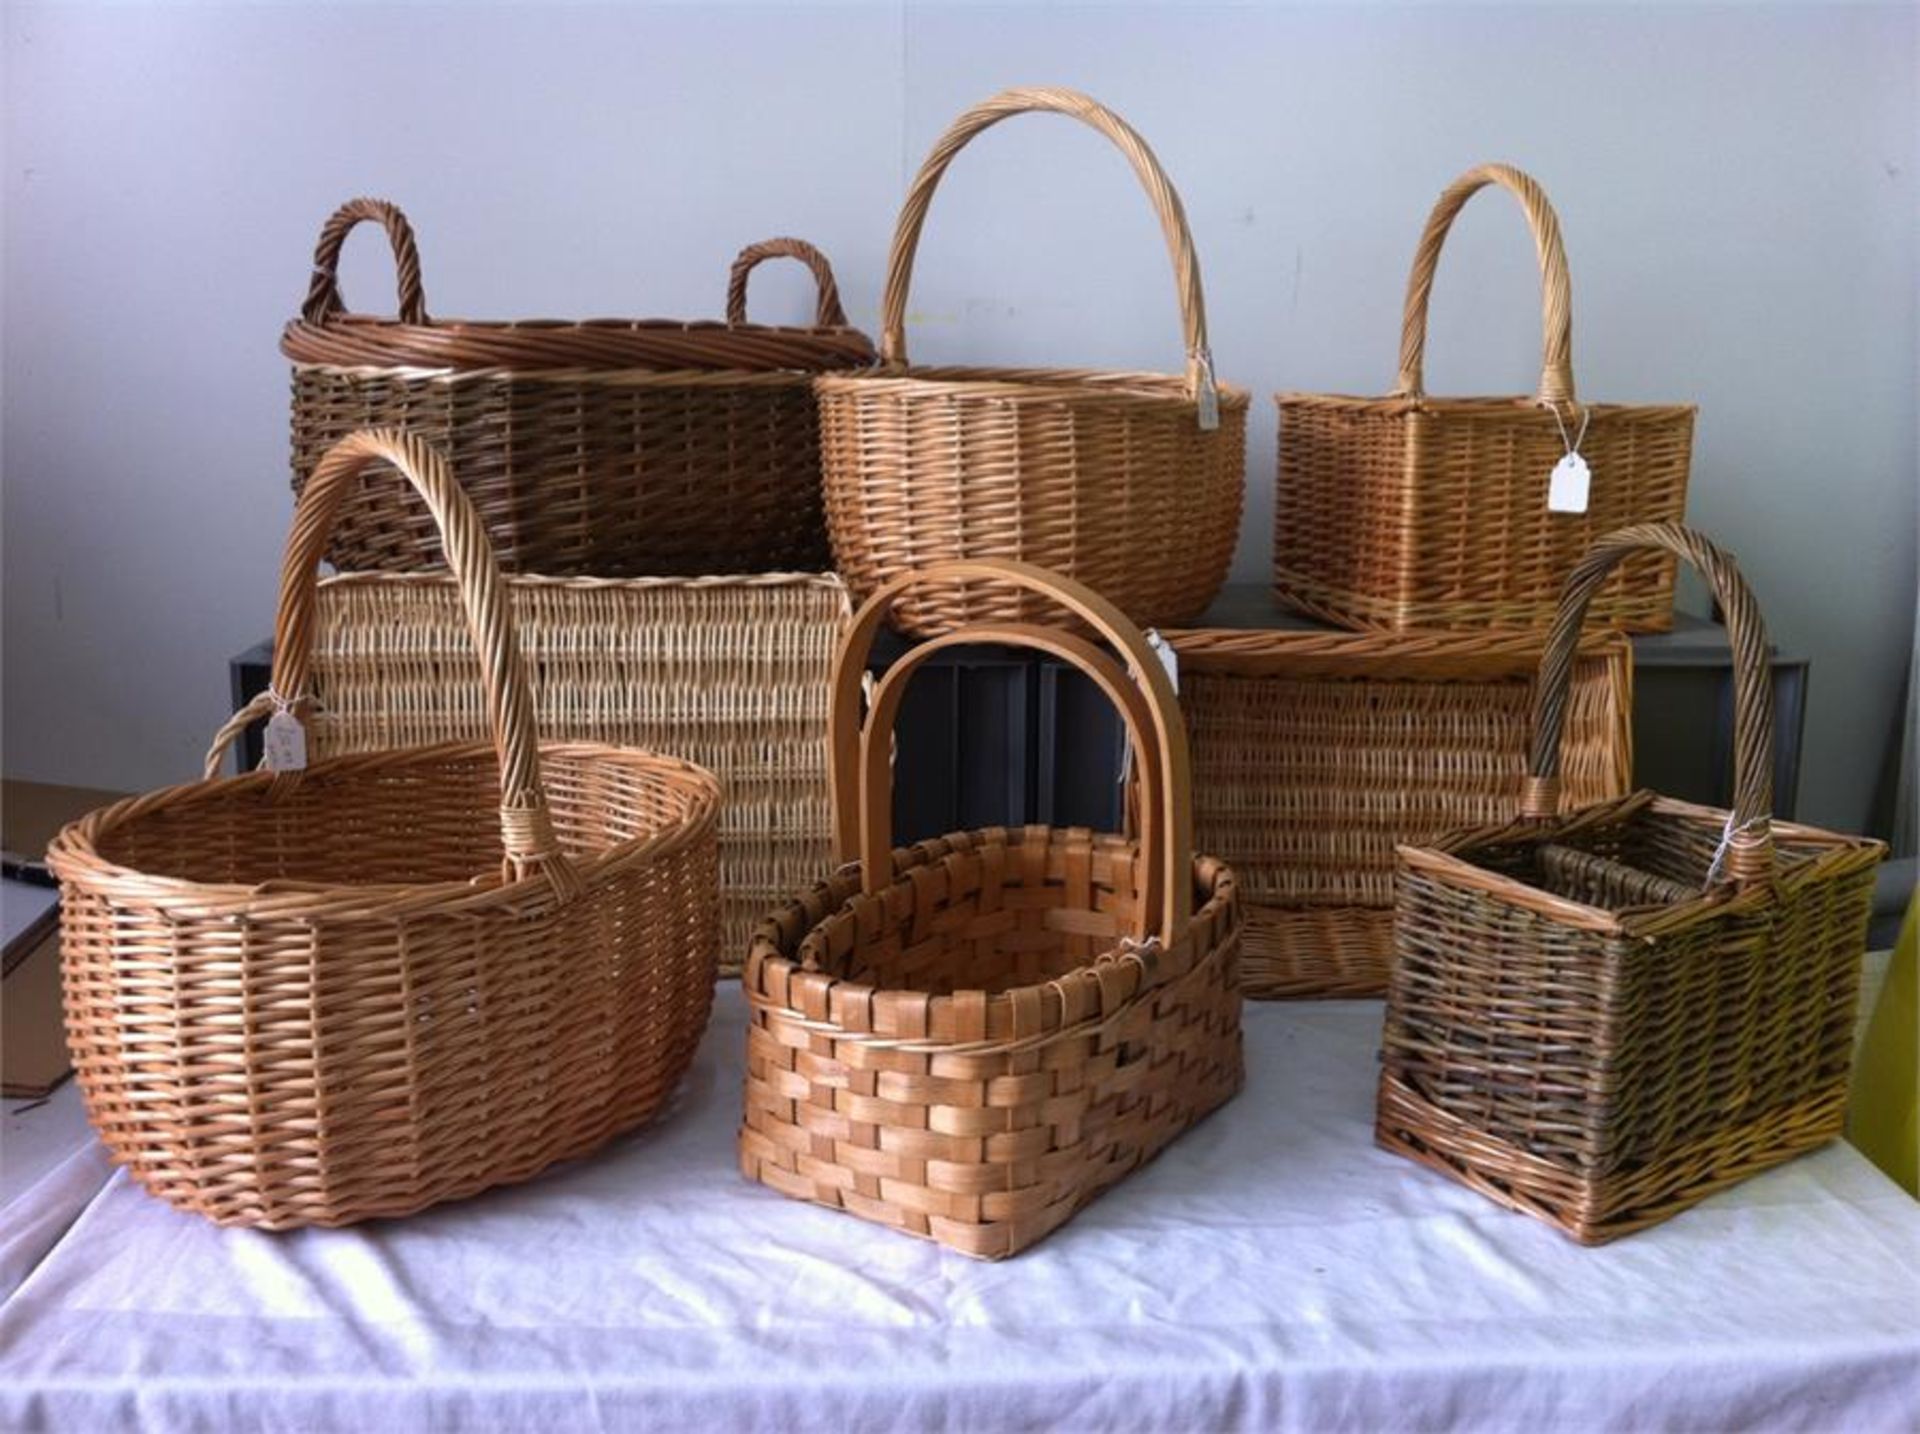 35 Wicker/Seagrass/Willow baskets - Image 2 of 3